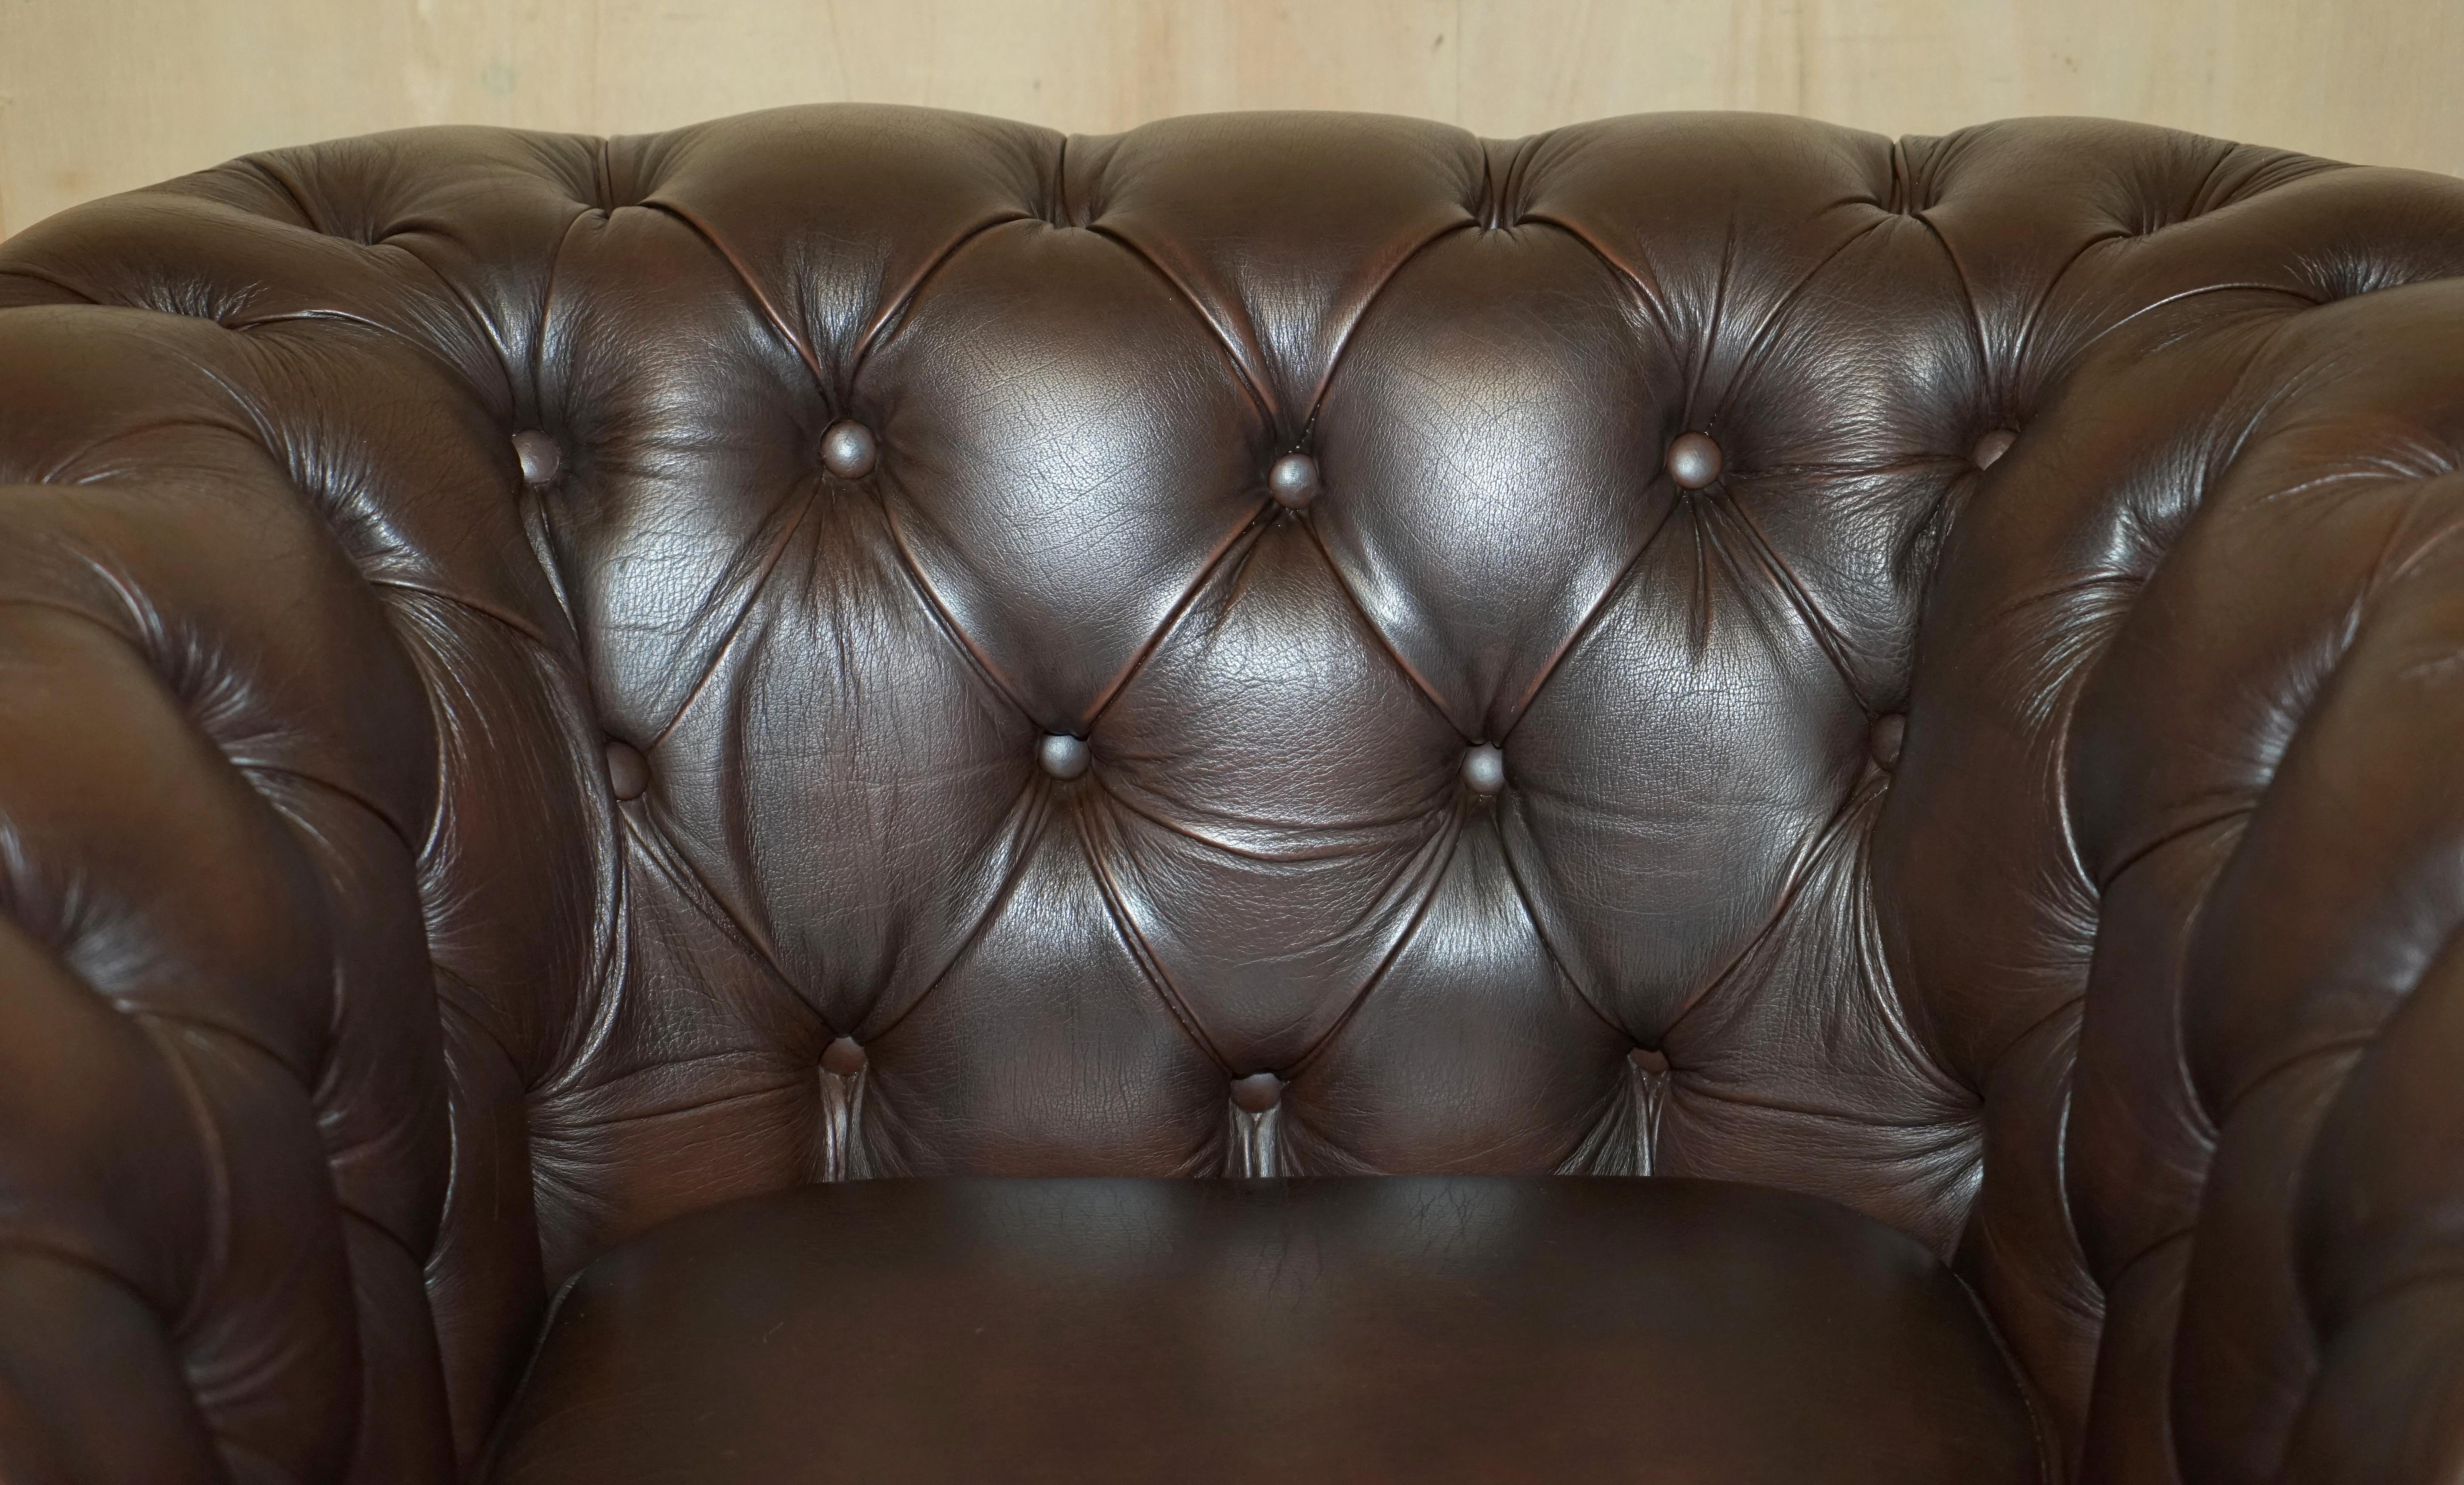 Chesterfield ViNTAGE THOMAS LLOYD MADE IN ENGLAND BROWN LEATHER CHESTERFIELD ARMCHAIR For Sale